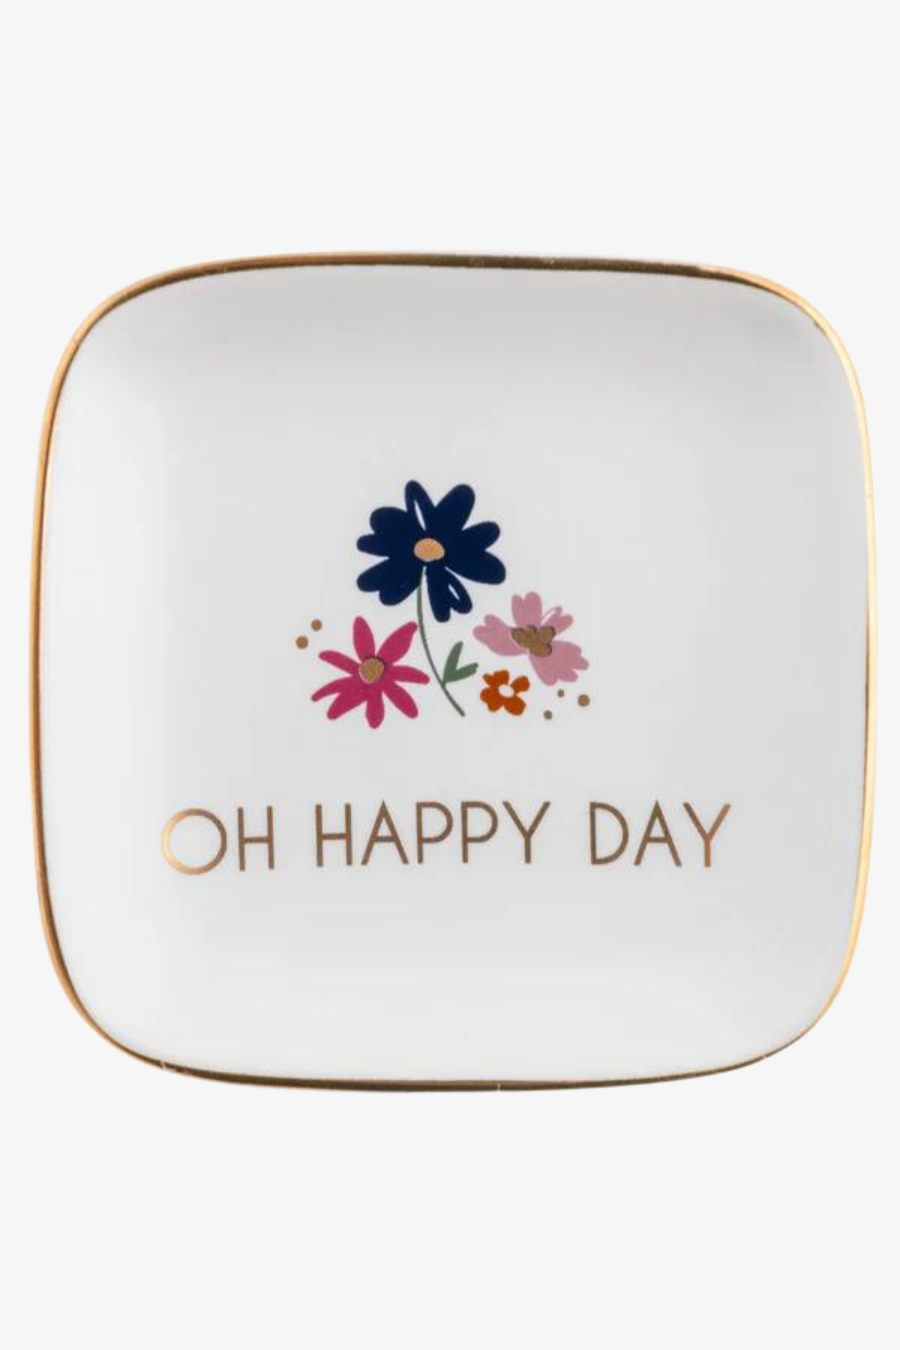 "Oh Happy Day" Small Square Trinket Dish